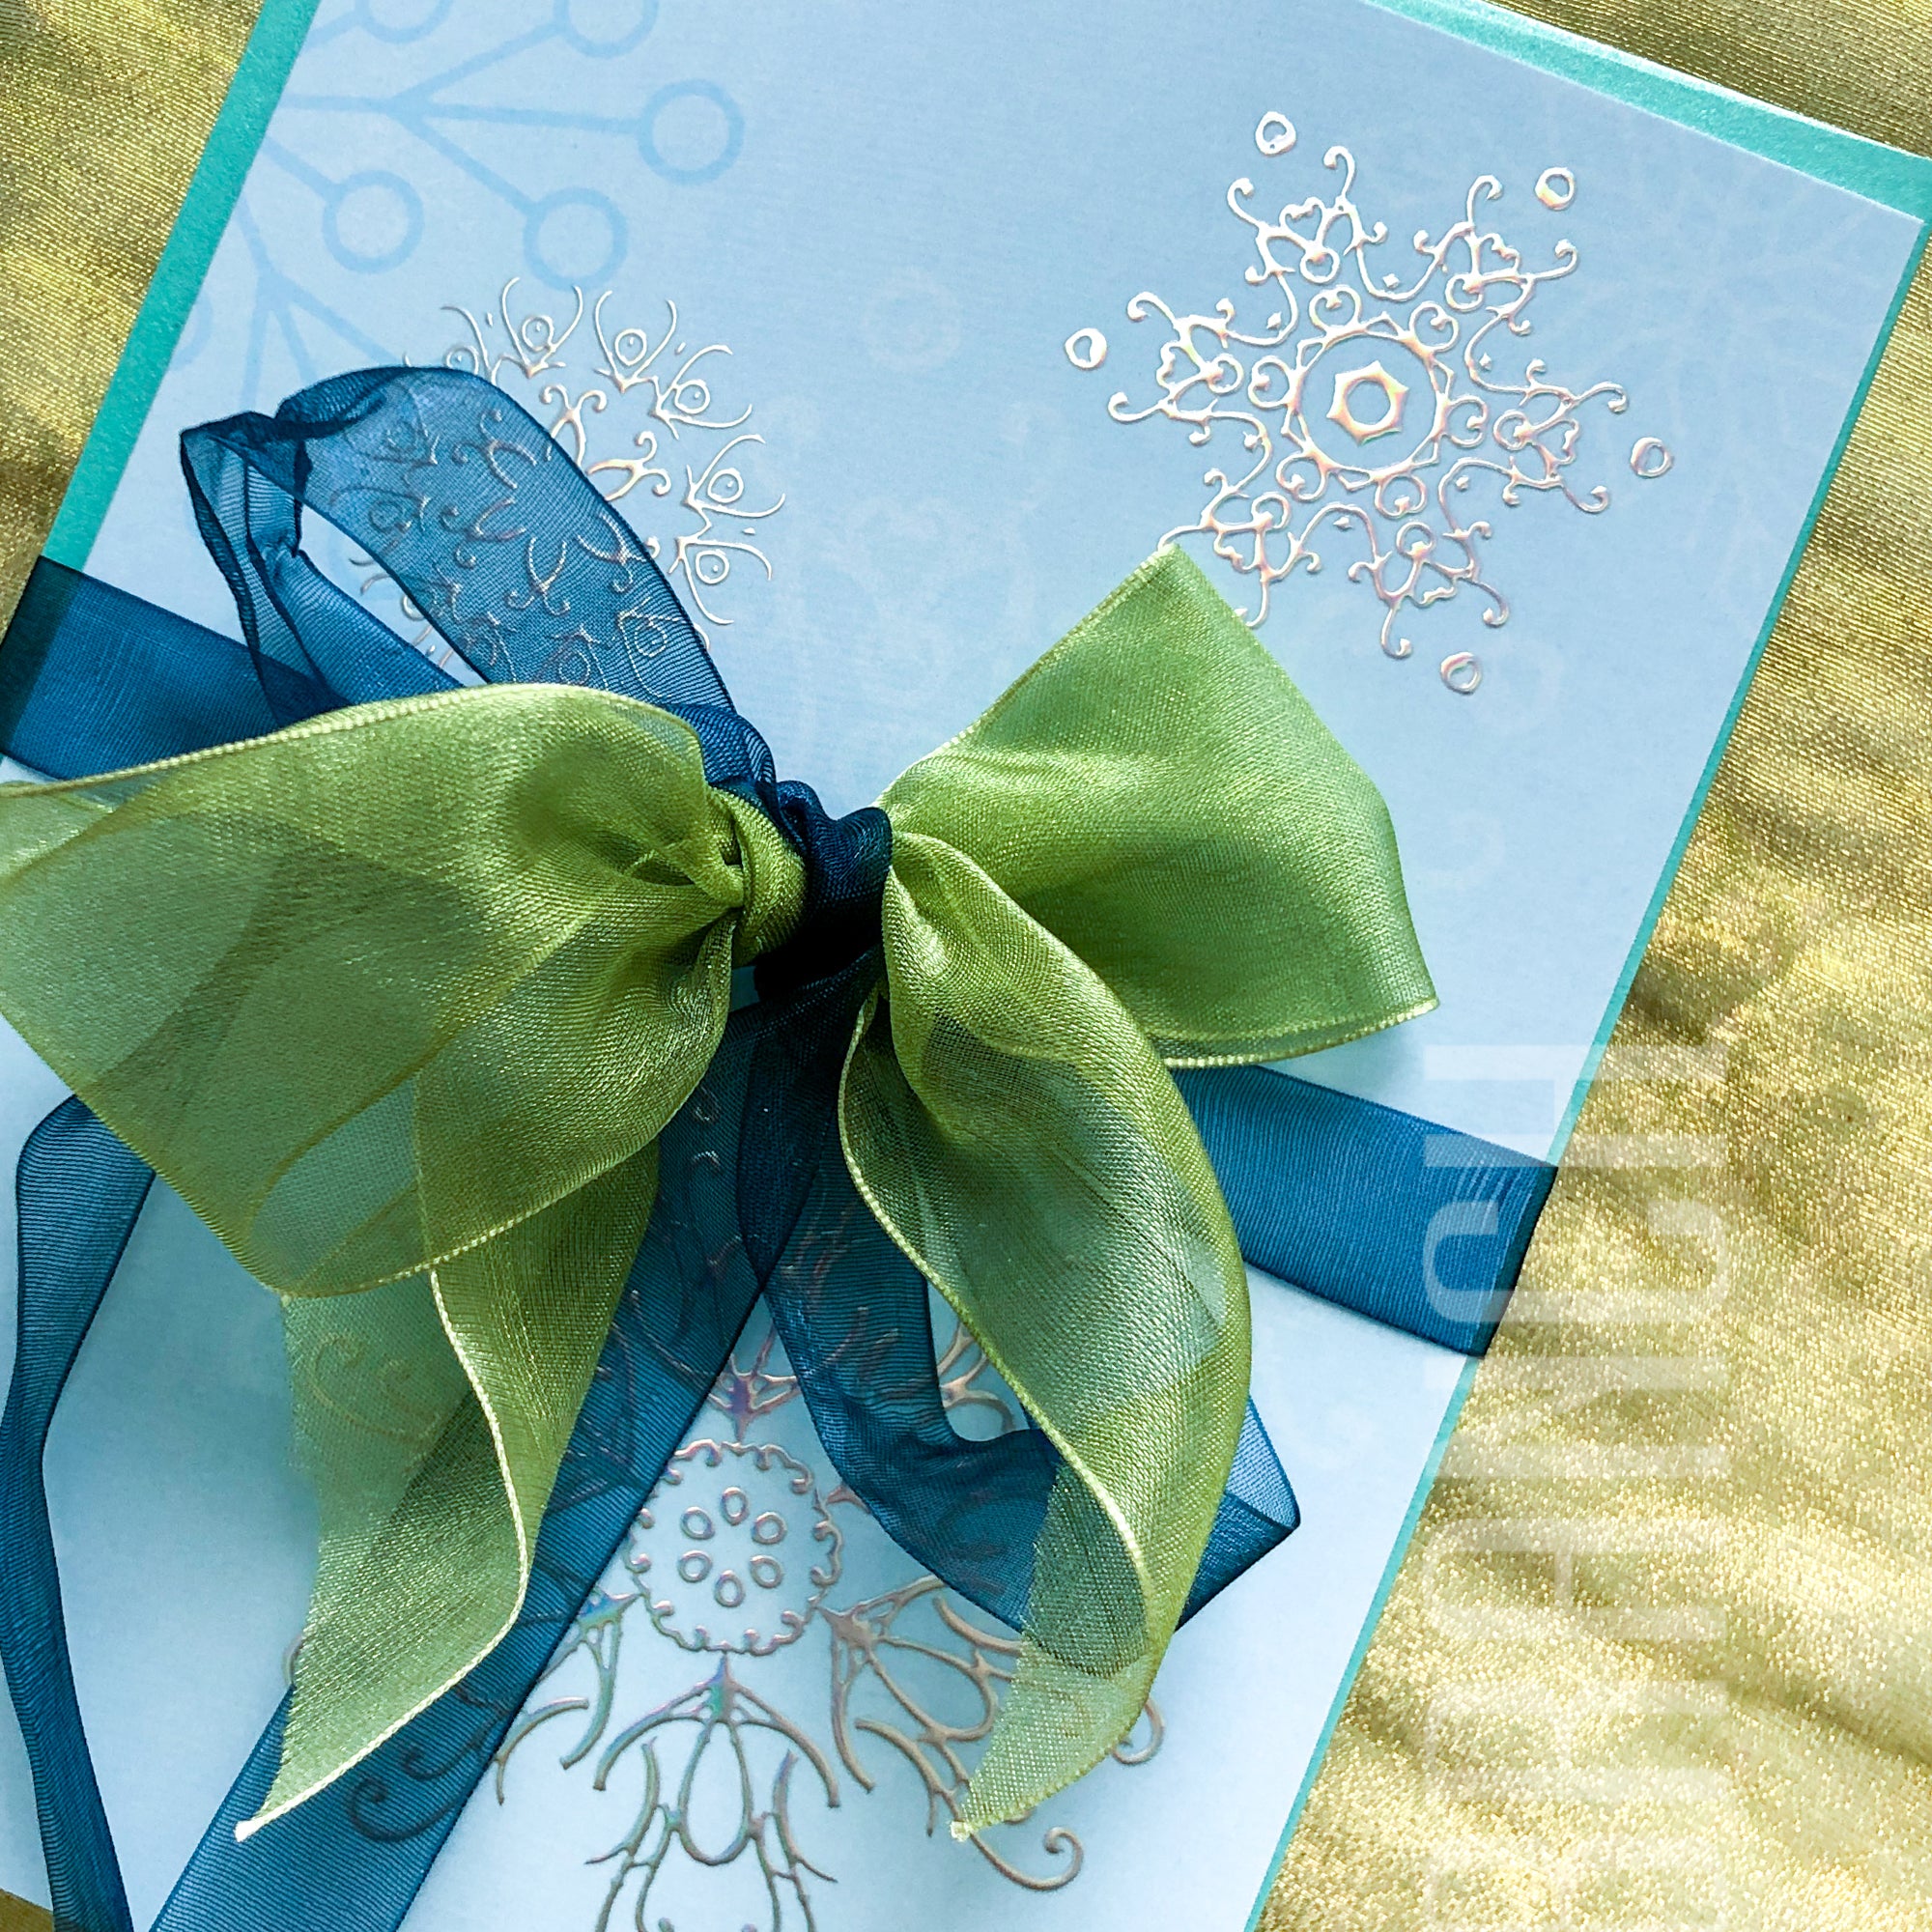 Ribbon-wrapped holiday cards from Lilybranch